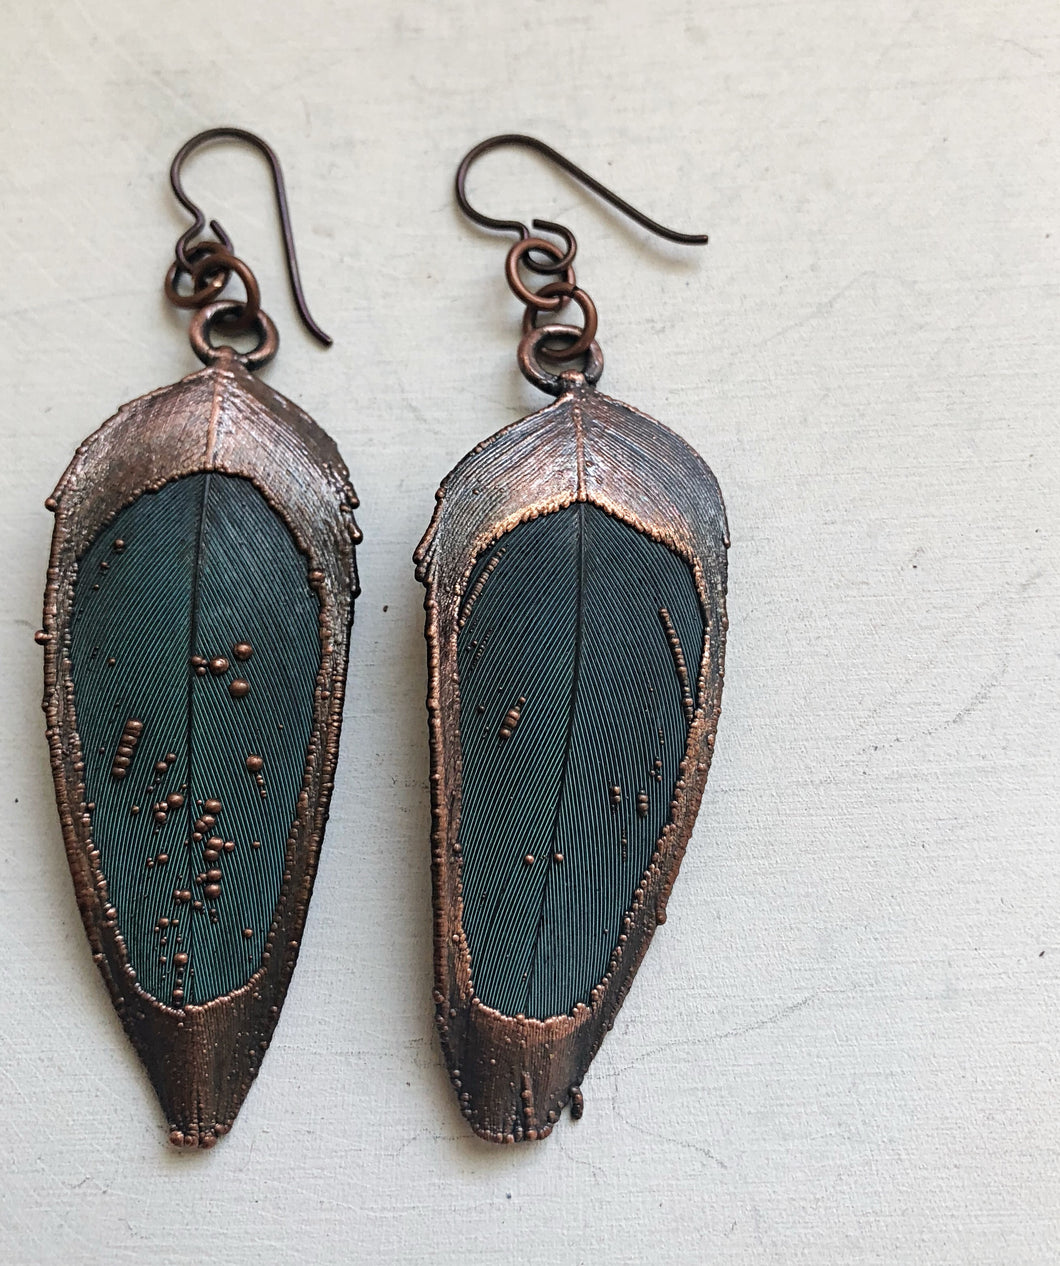 Electroformed Macaw Feather Earrings #2 - Ready to Ship (5/17 Update)